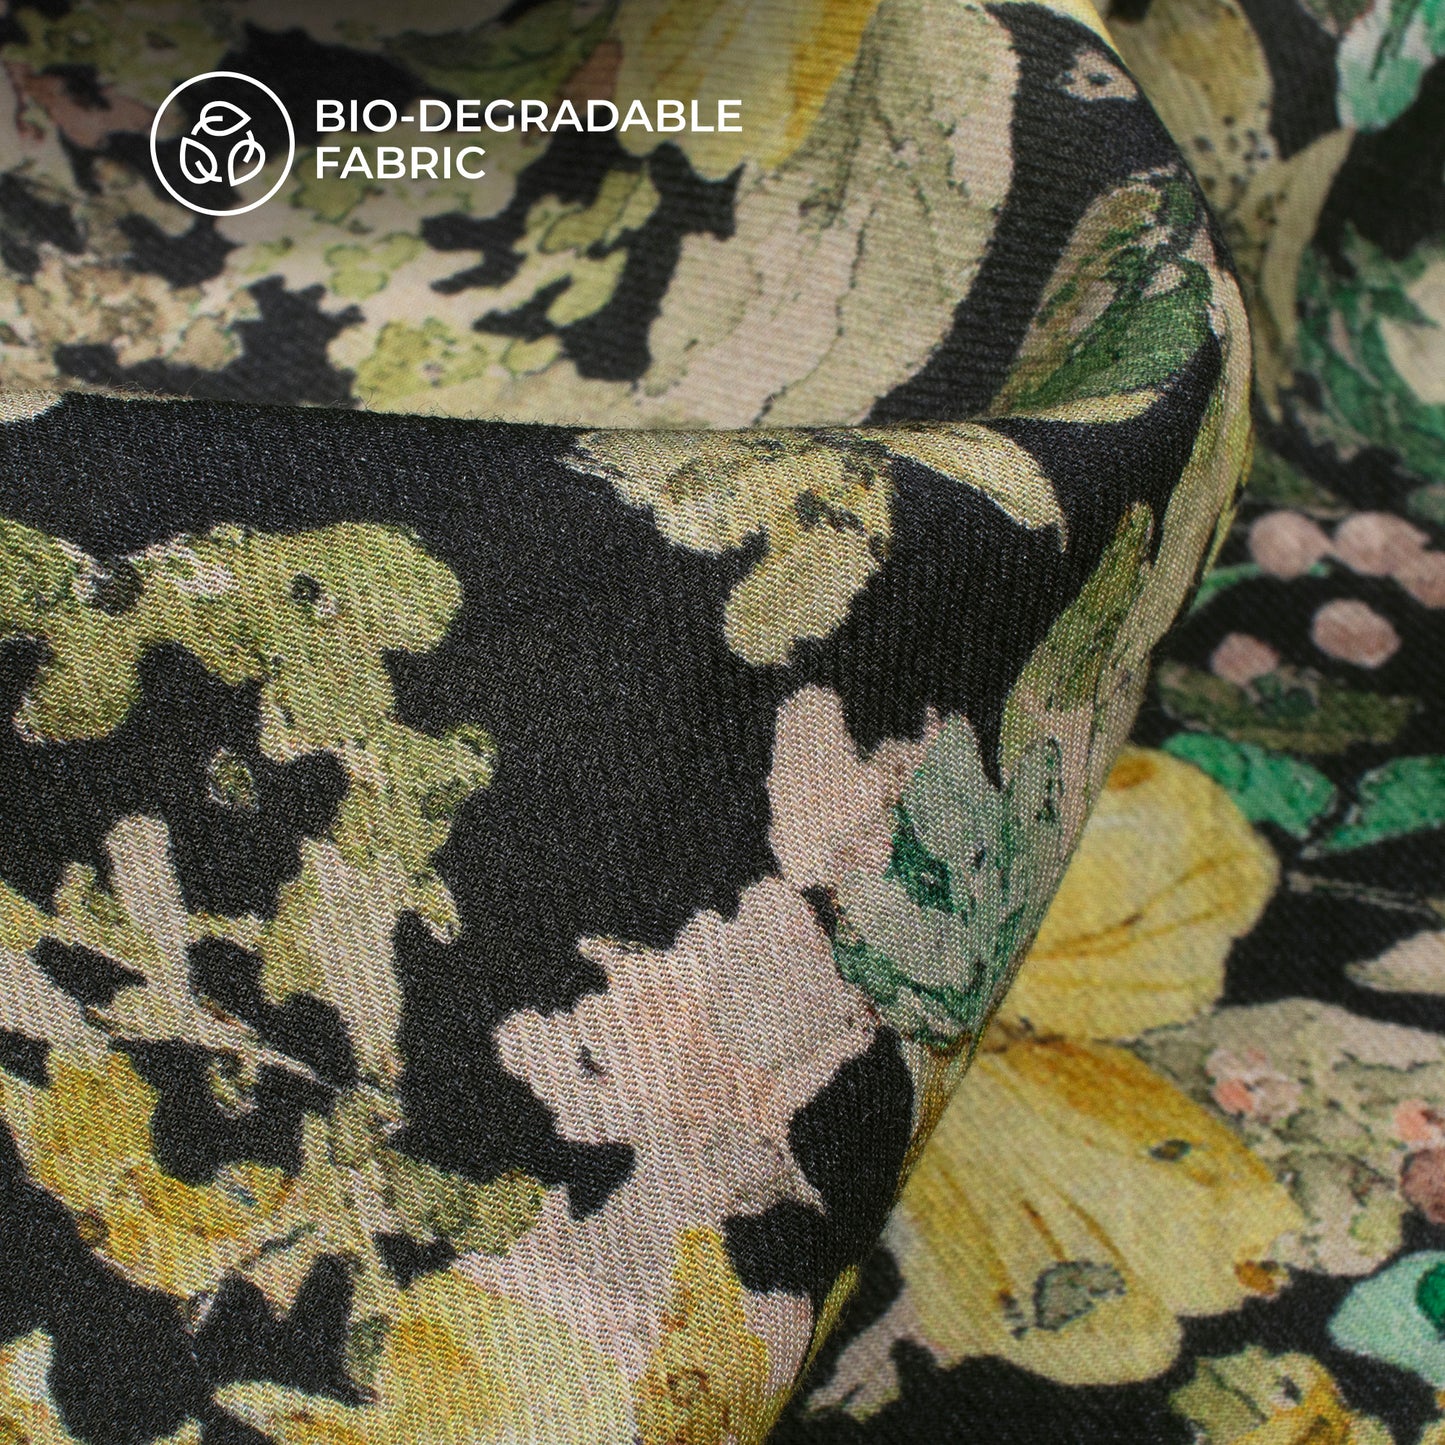 Corn Yellow Floral Printed Sustainable Milk Fabric